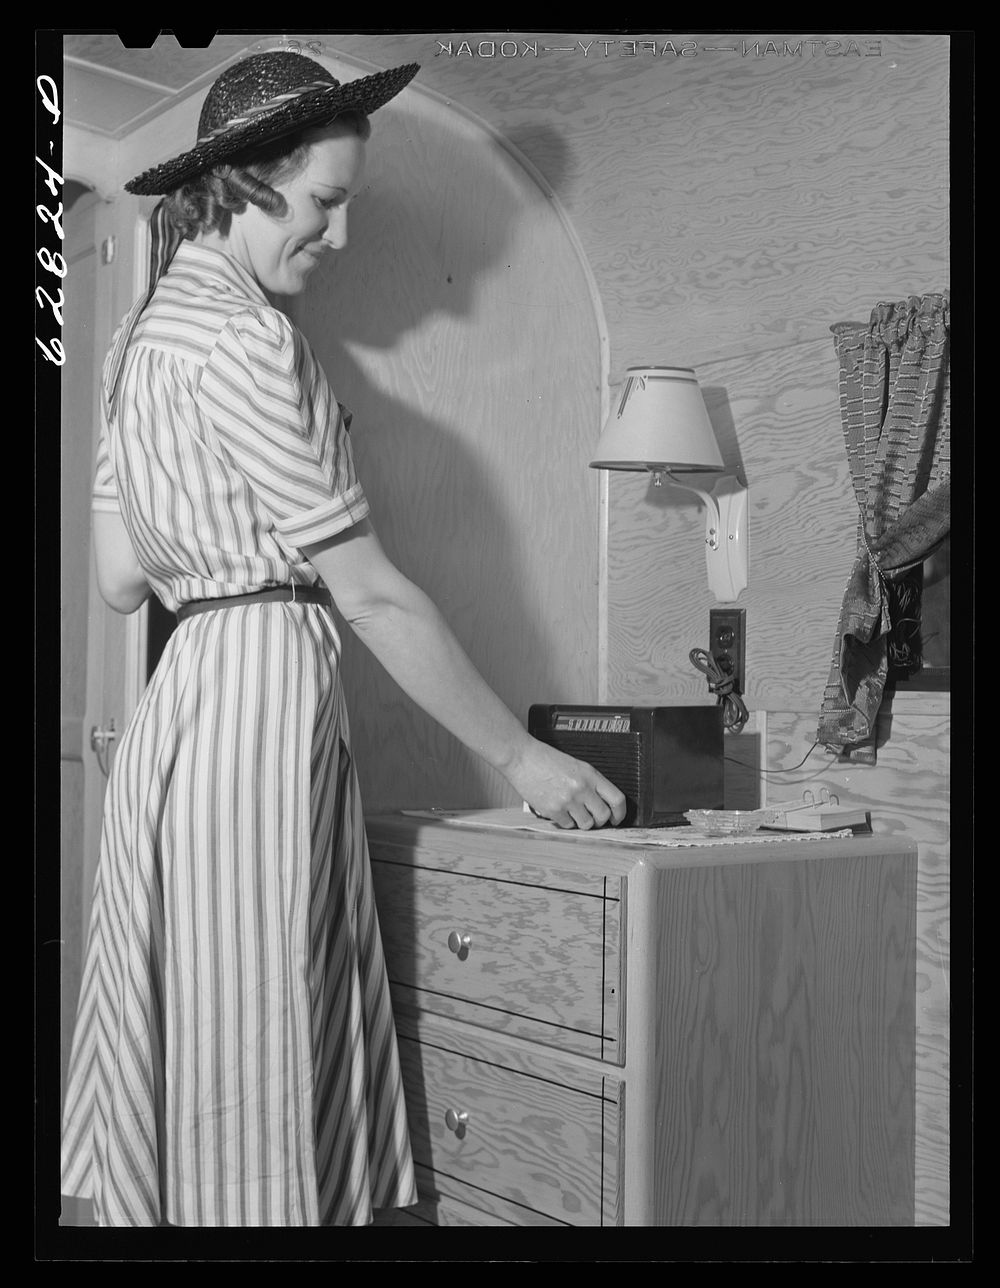 Tuning in radio in trailer at FSA (Farm Security Administration) camp. Erie, Pennsylvania. Sourced from the Library of…